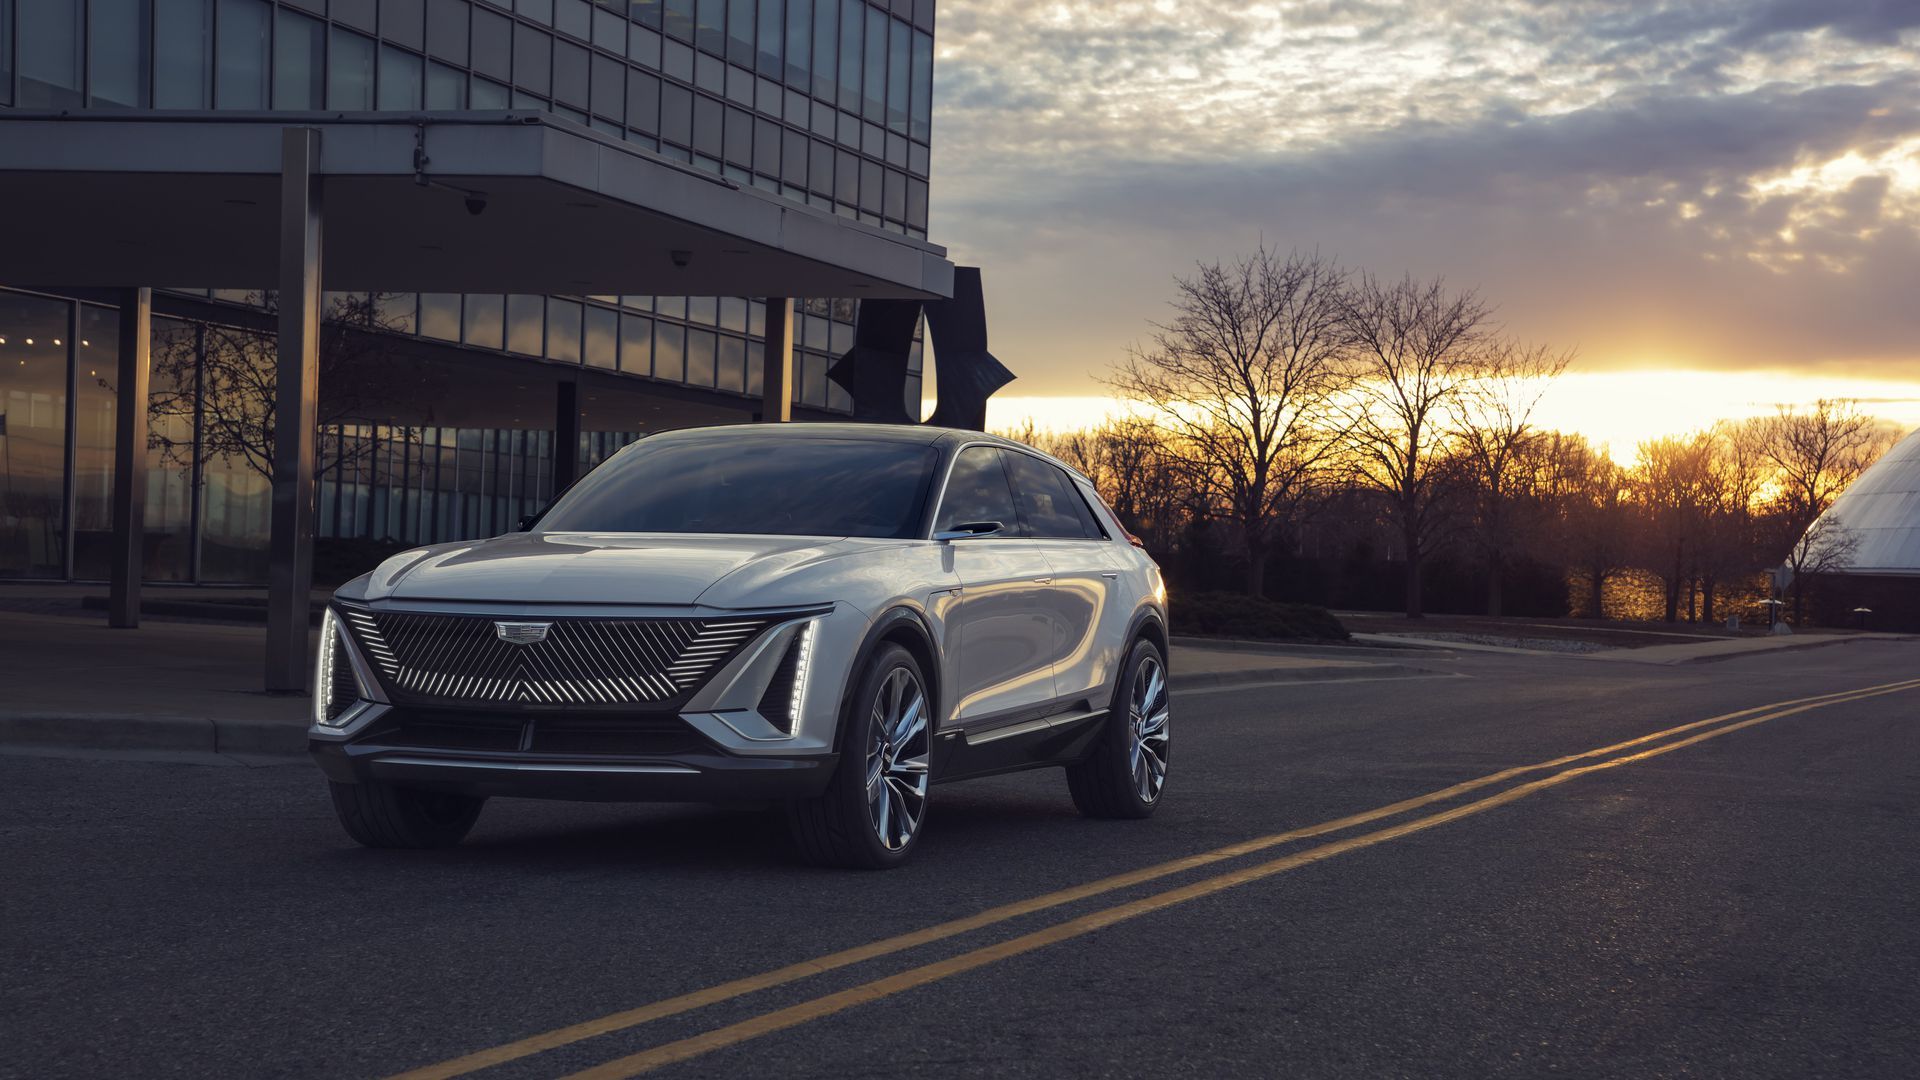 Coming in 2022: the electric Cadillac LYRIQ. Photo: GM